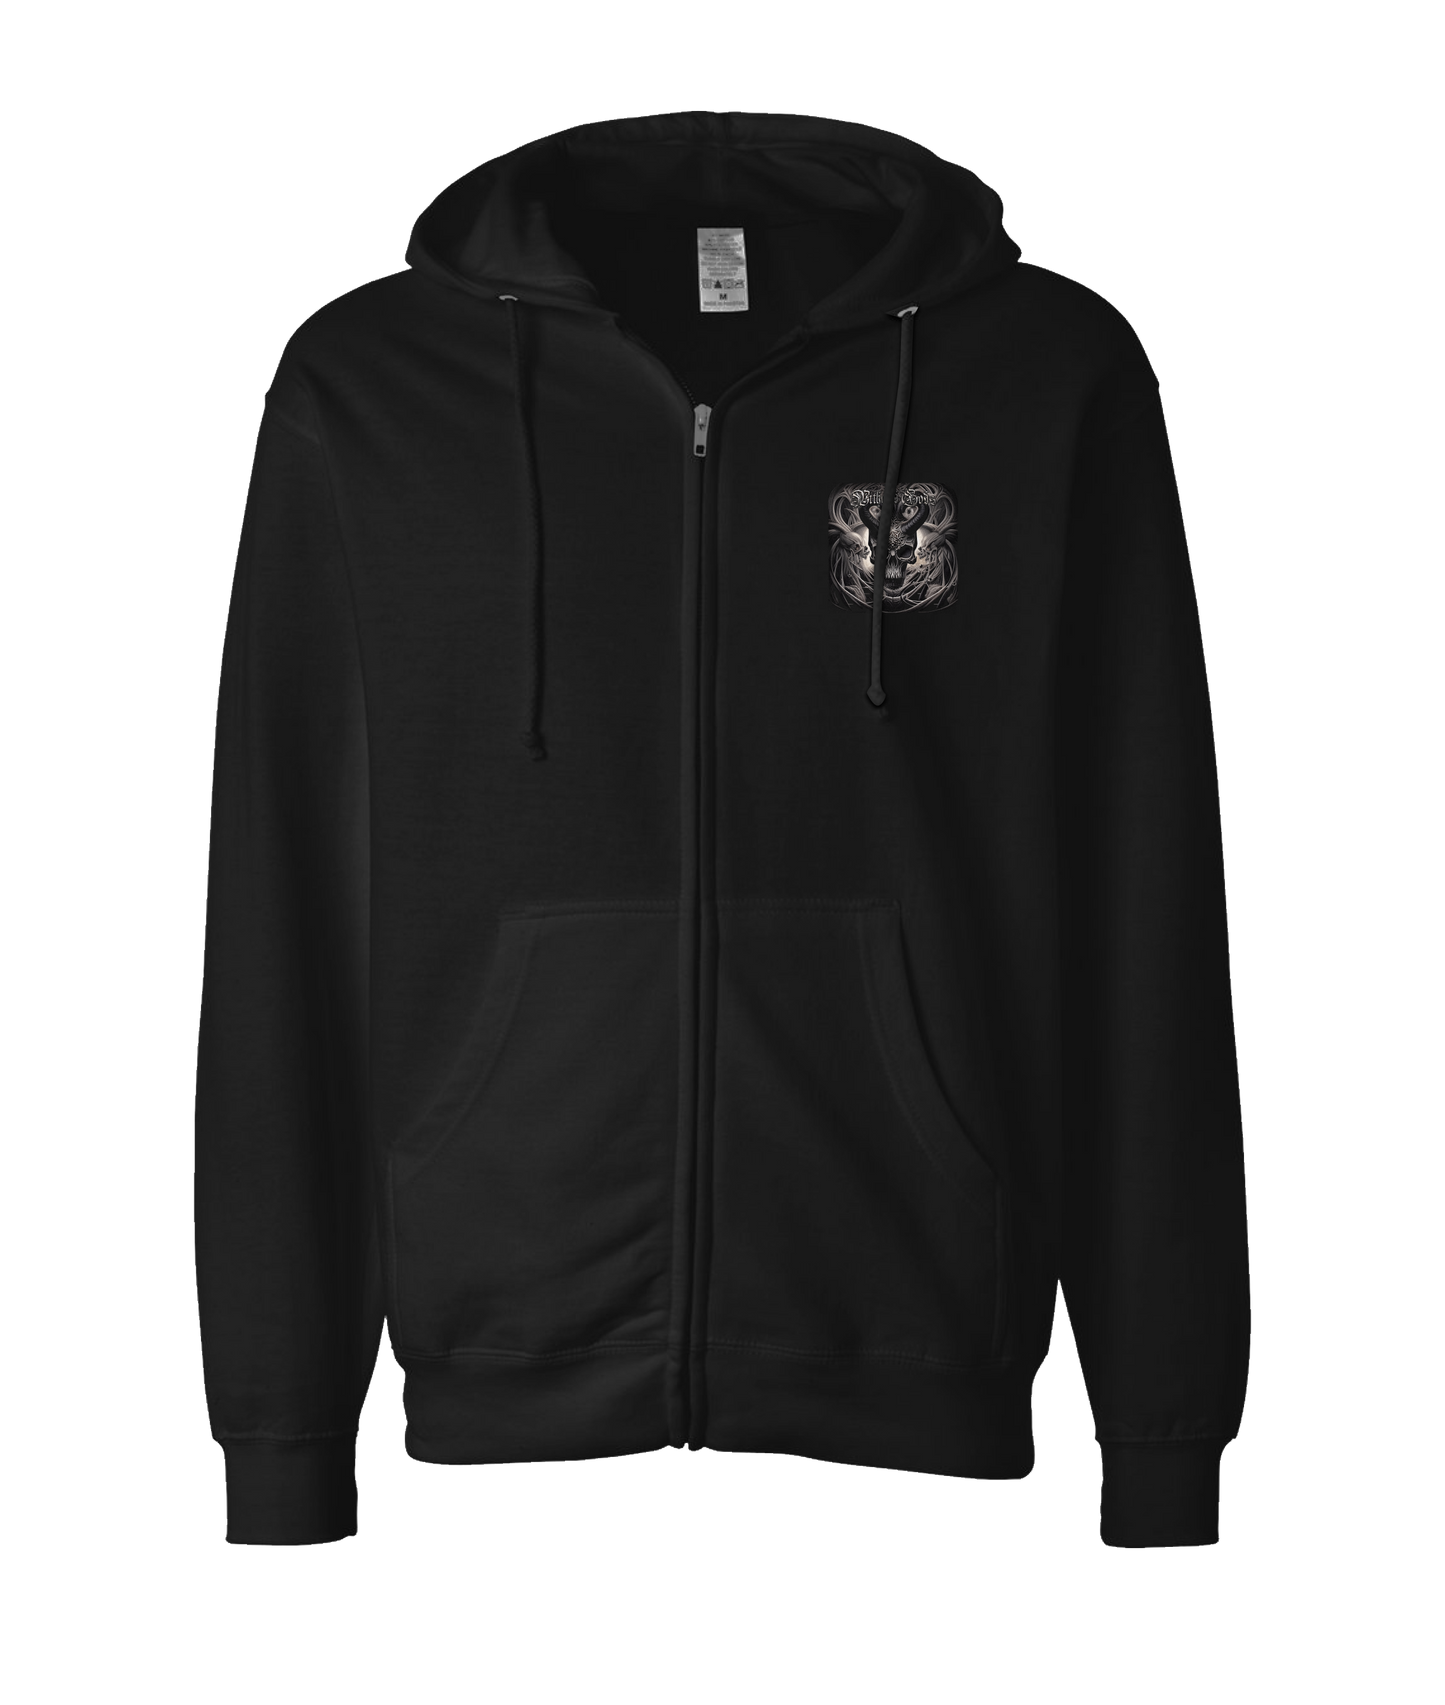 Withered Gods - The Rite to Death - Black Zip Up Hoodie